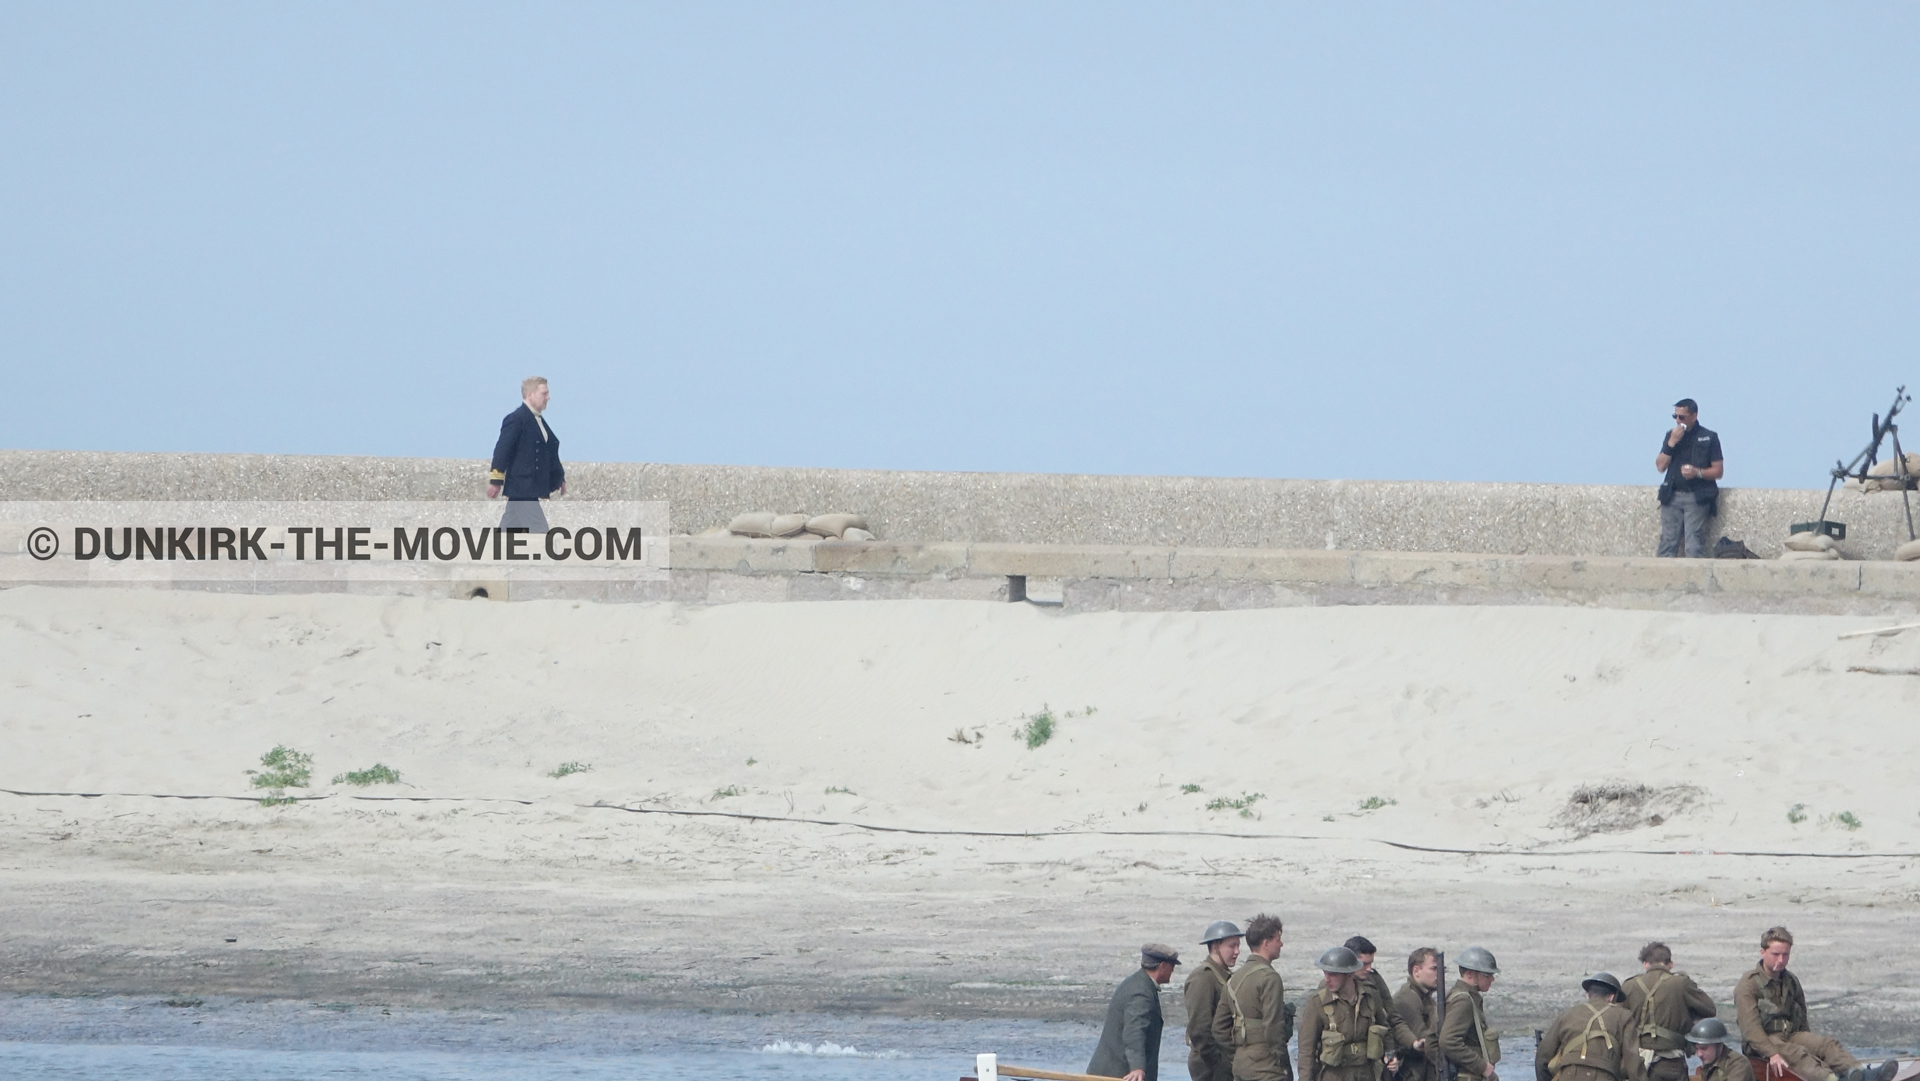 Picture with supernumeraries, EST pier, Kenneth Branagh, technical team,  from behind the scene of the Dunkirk movie by Nolan